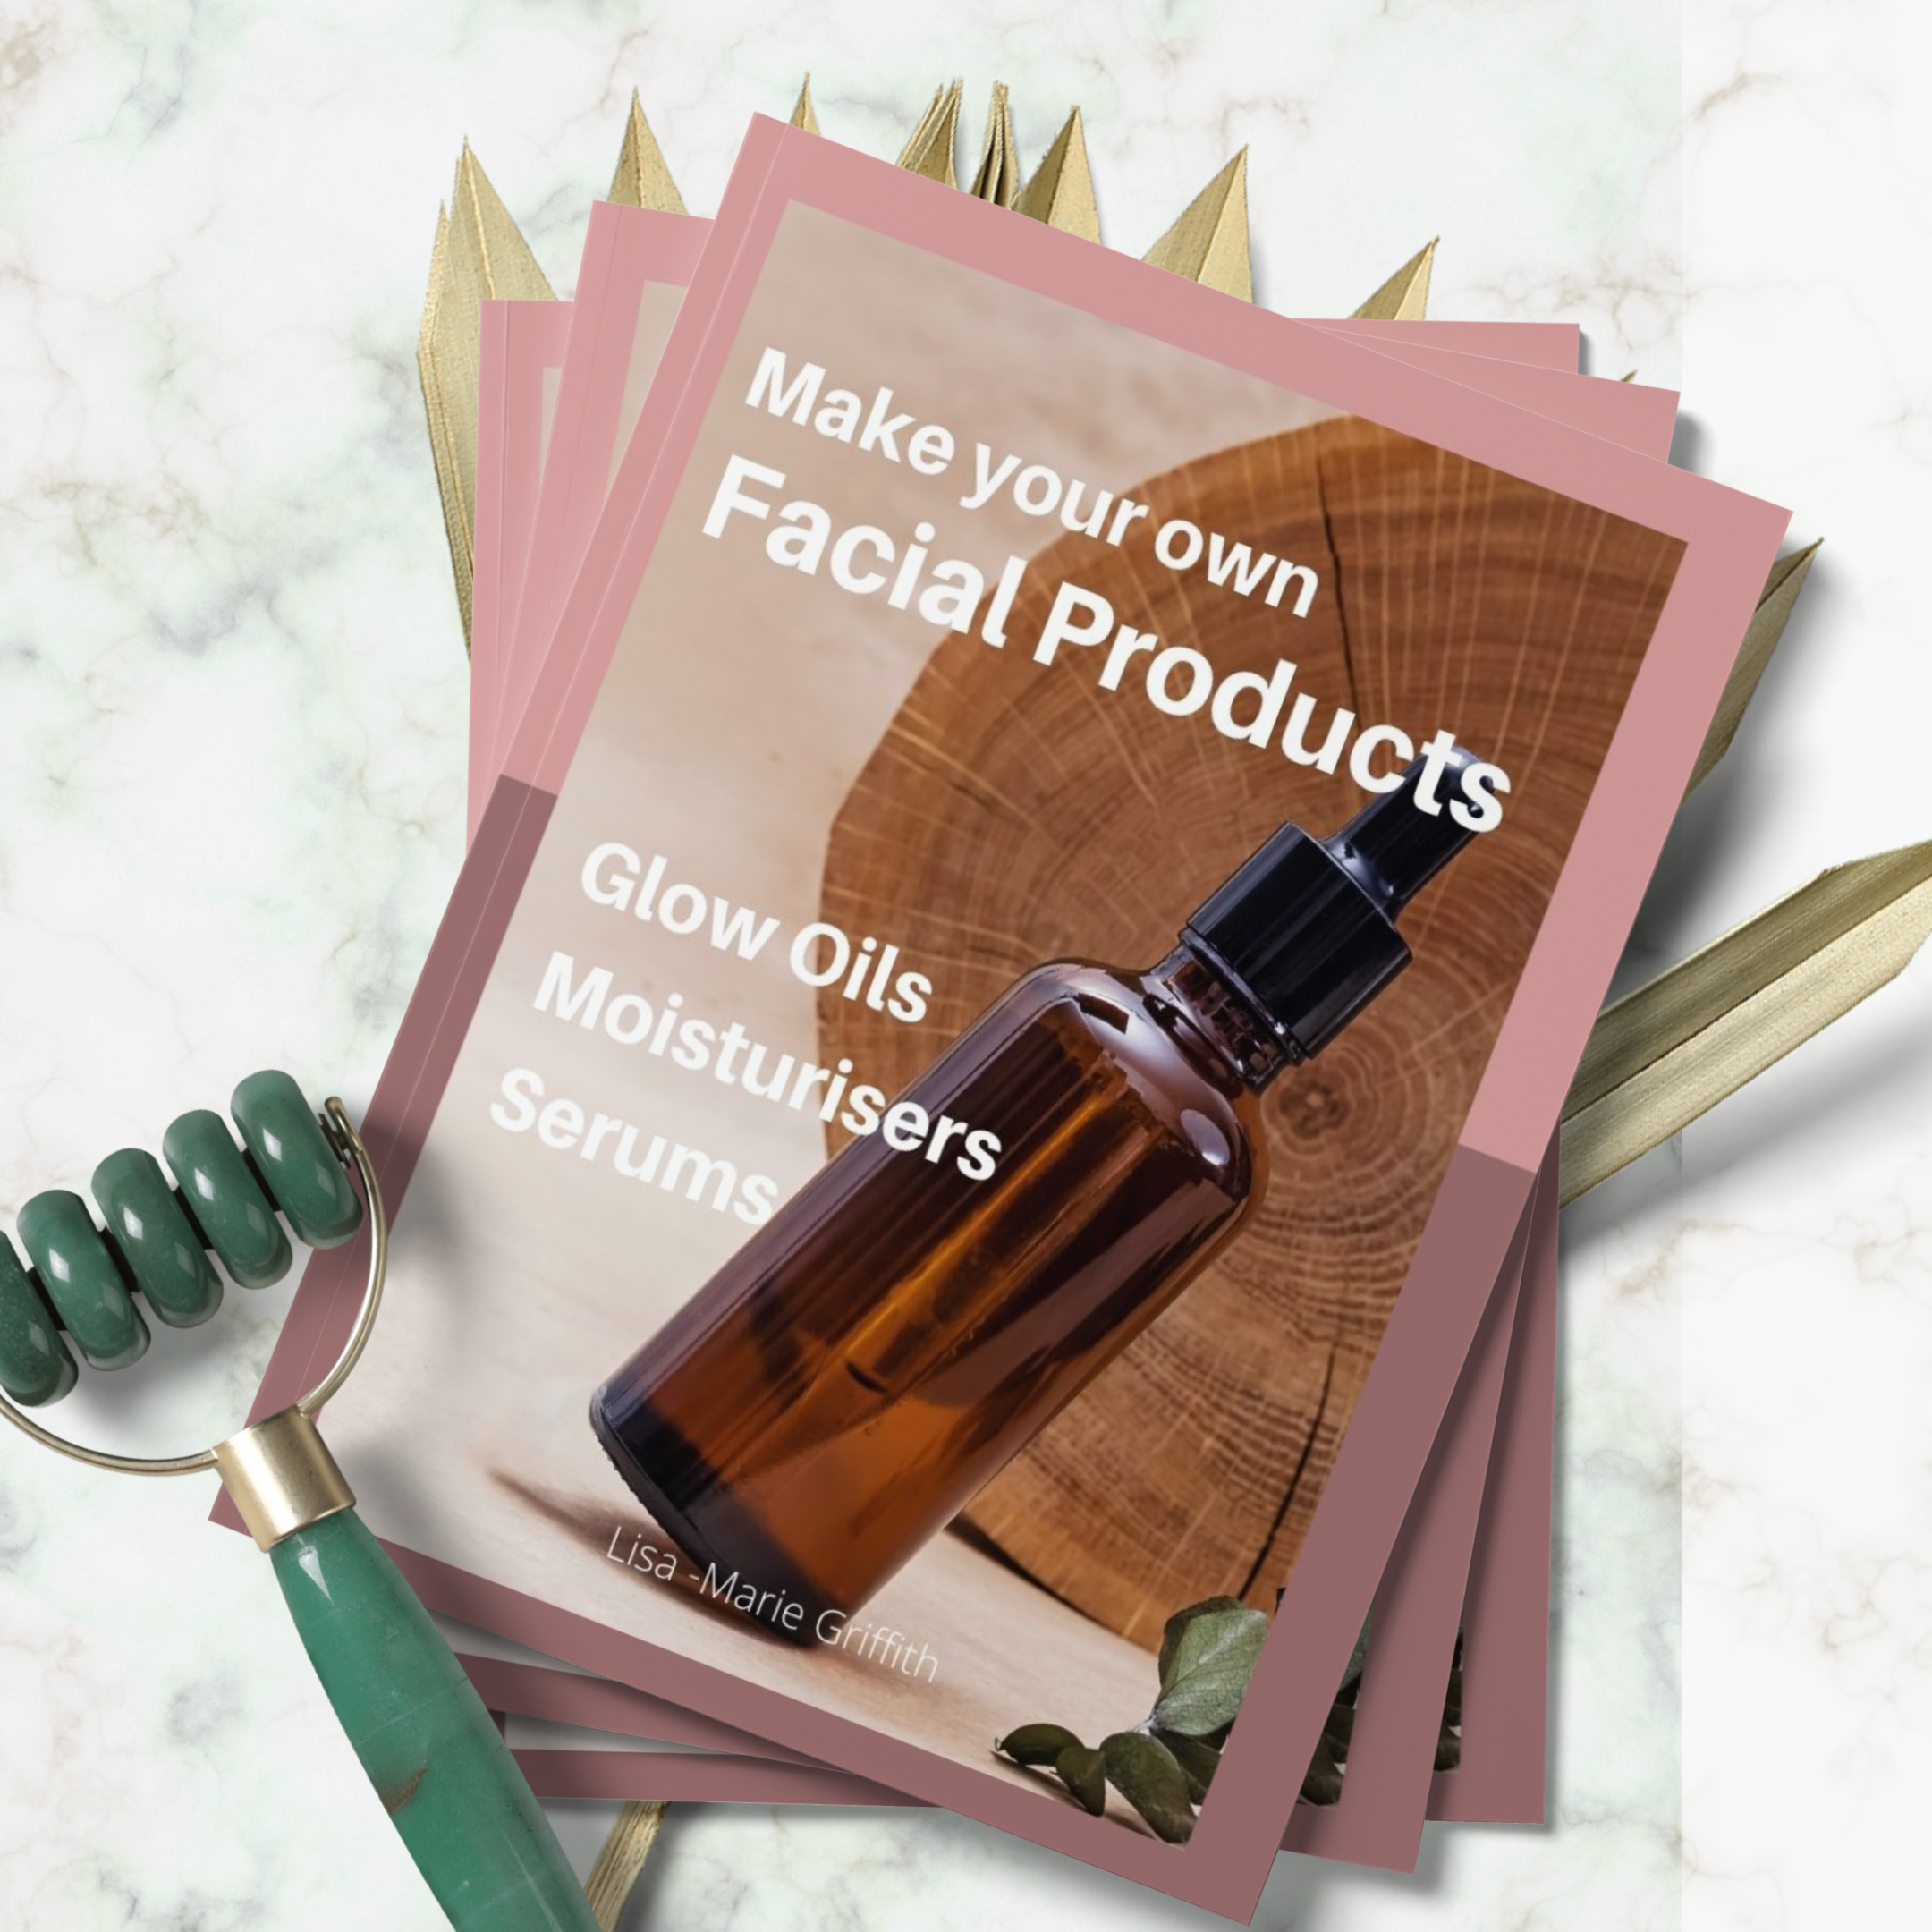 Make your own Facial Products E book